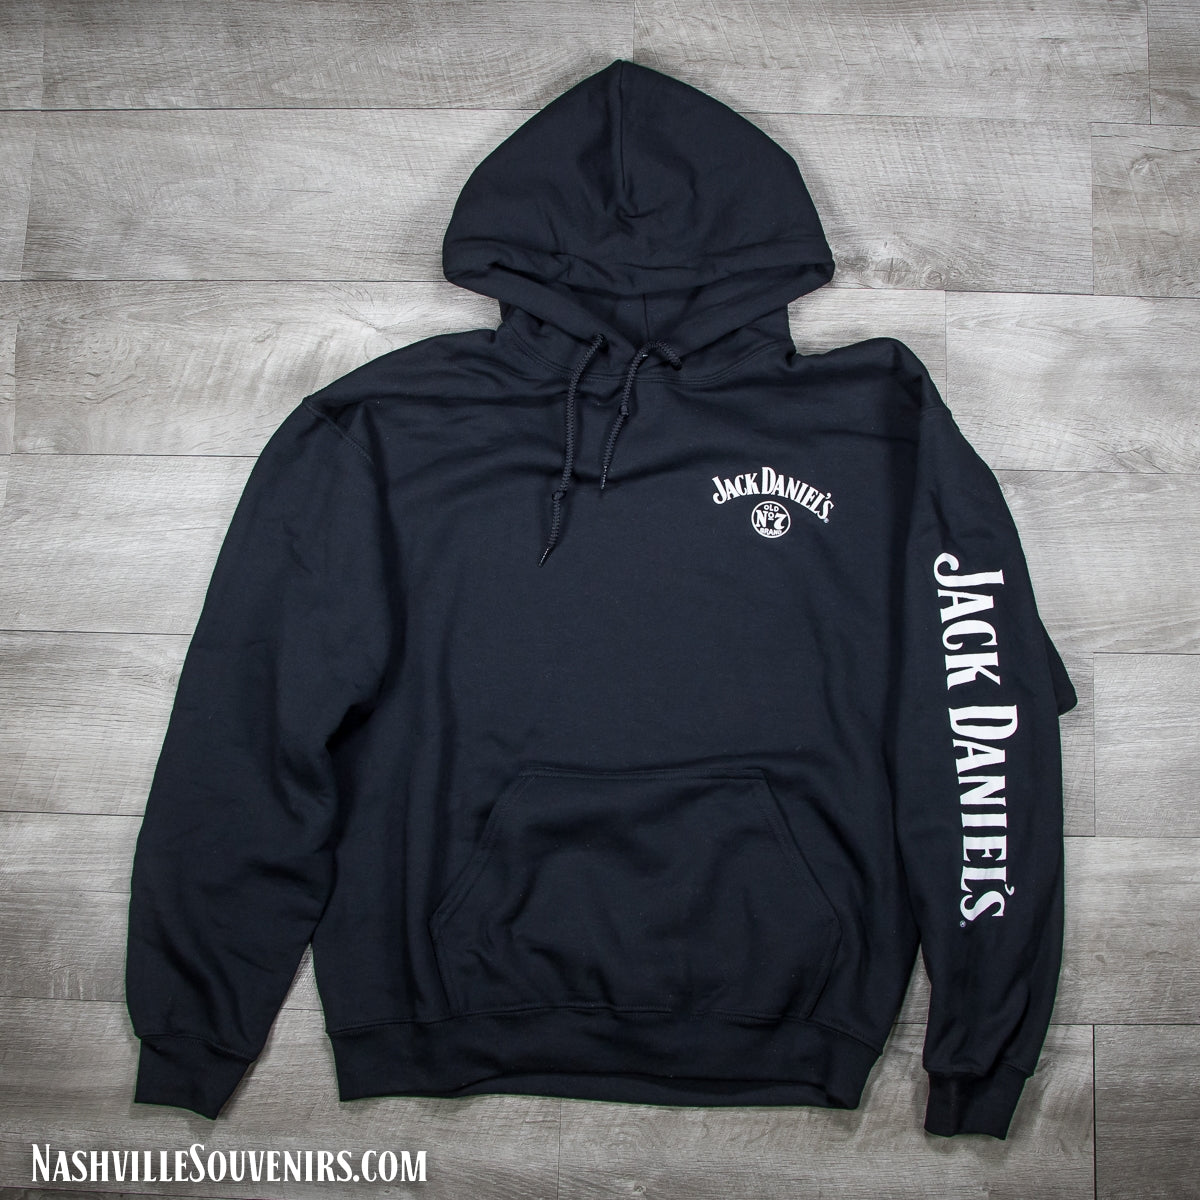 Officially licensed Jack Daniels Old No.7 Brand Hoodie. Get yours with FREE SHIPPING on all US orders over $75!